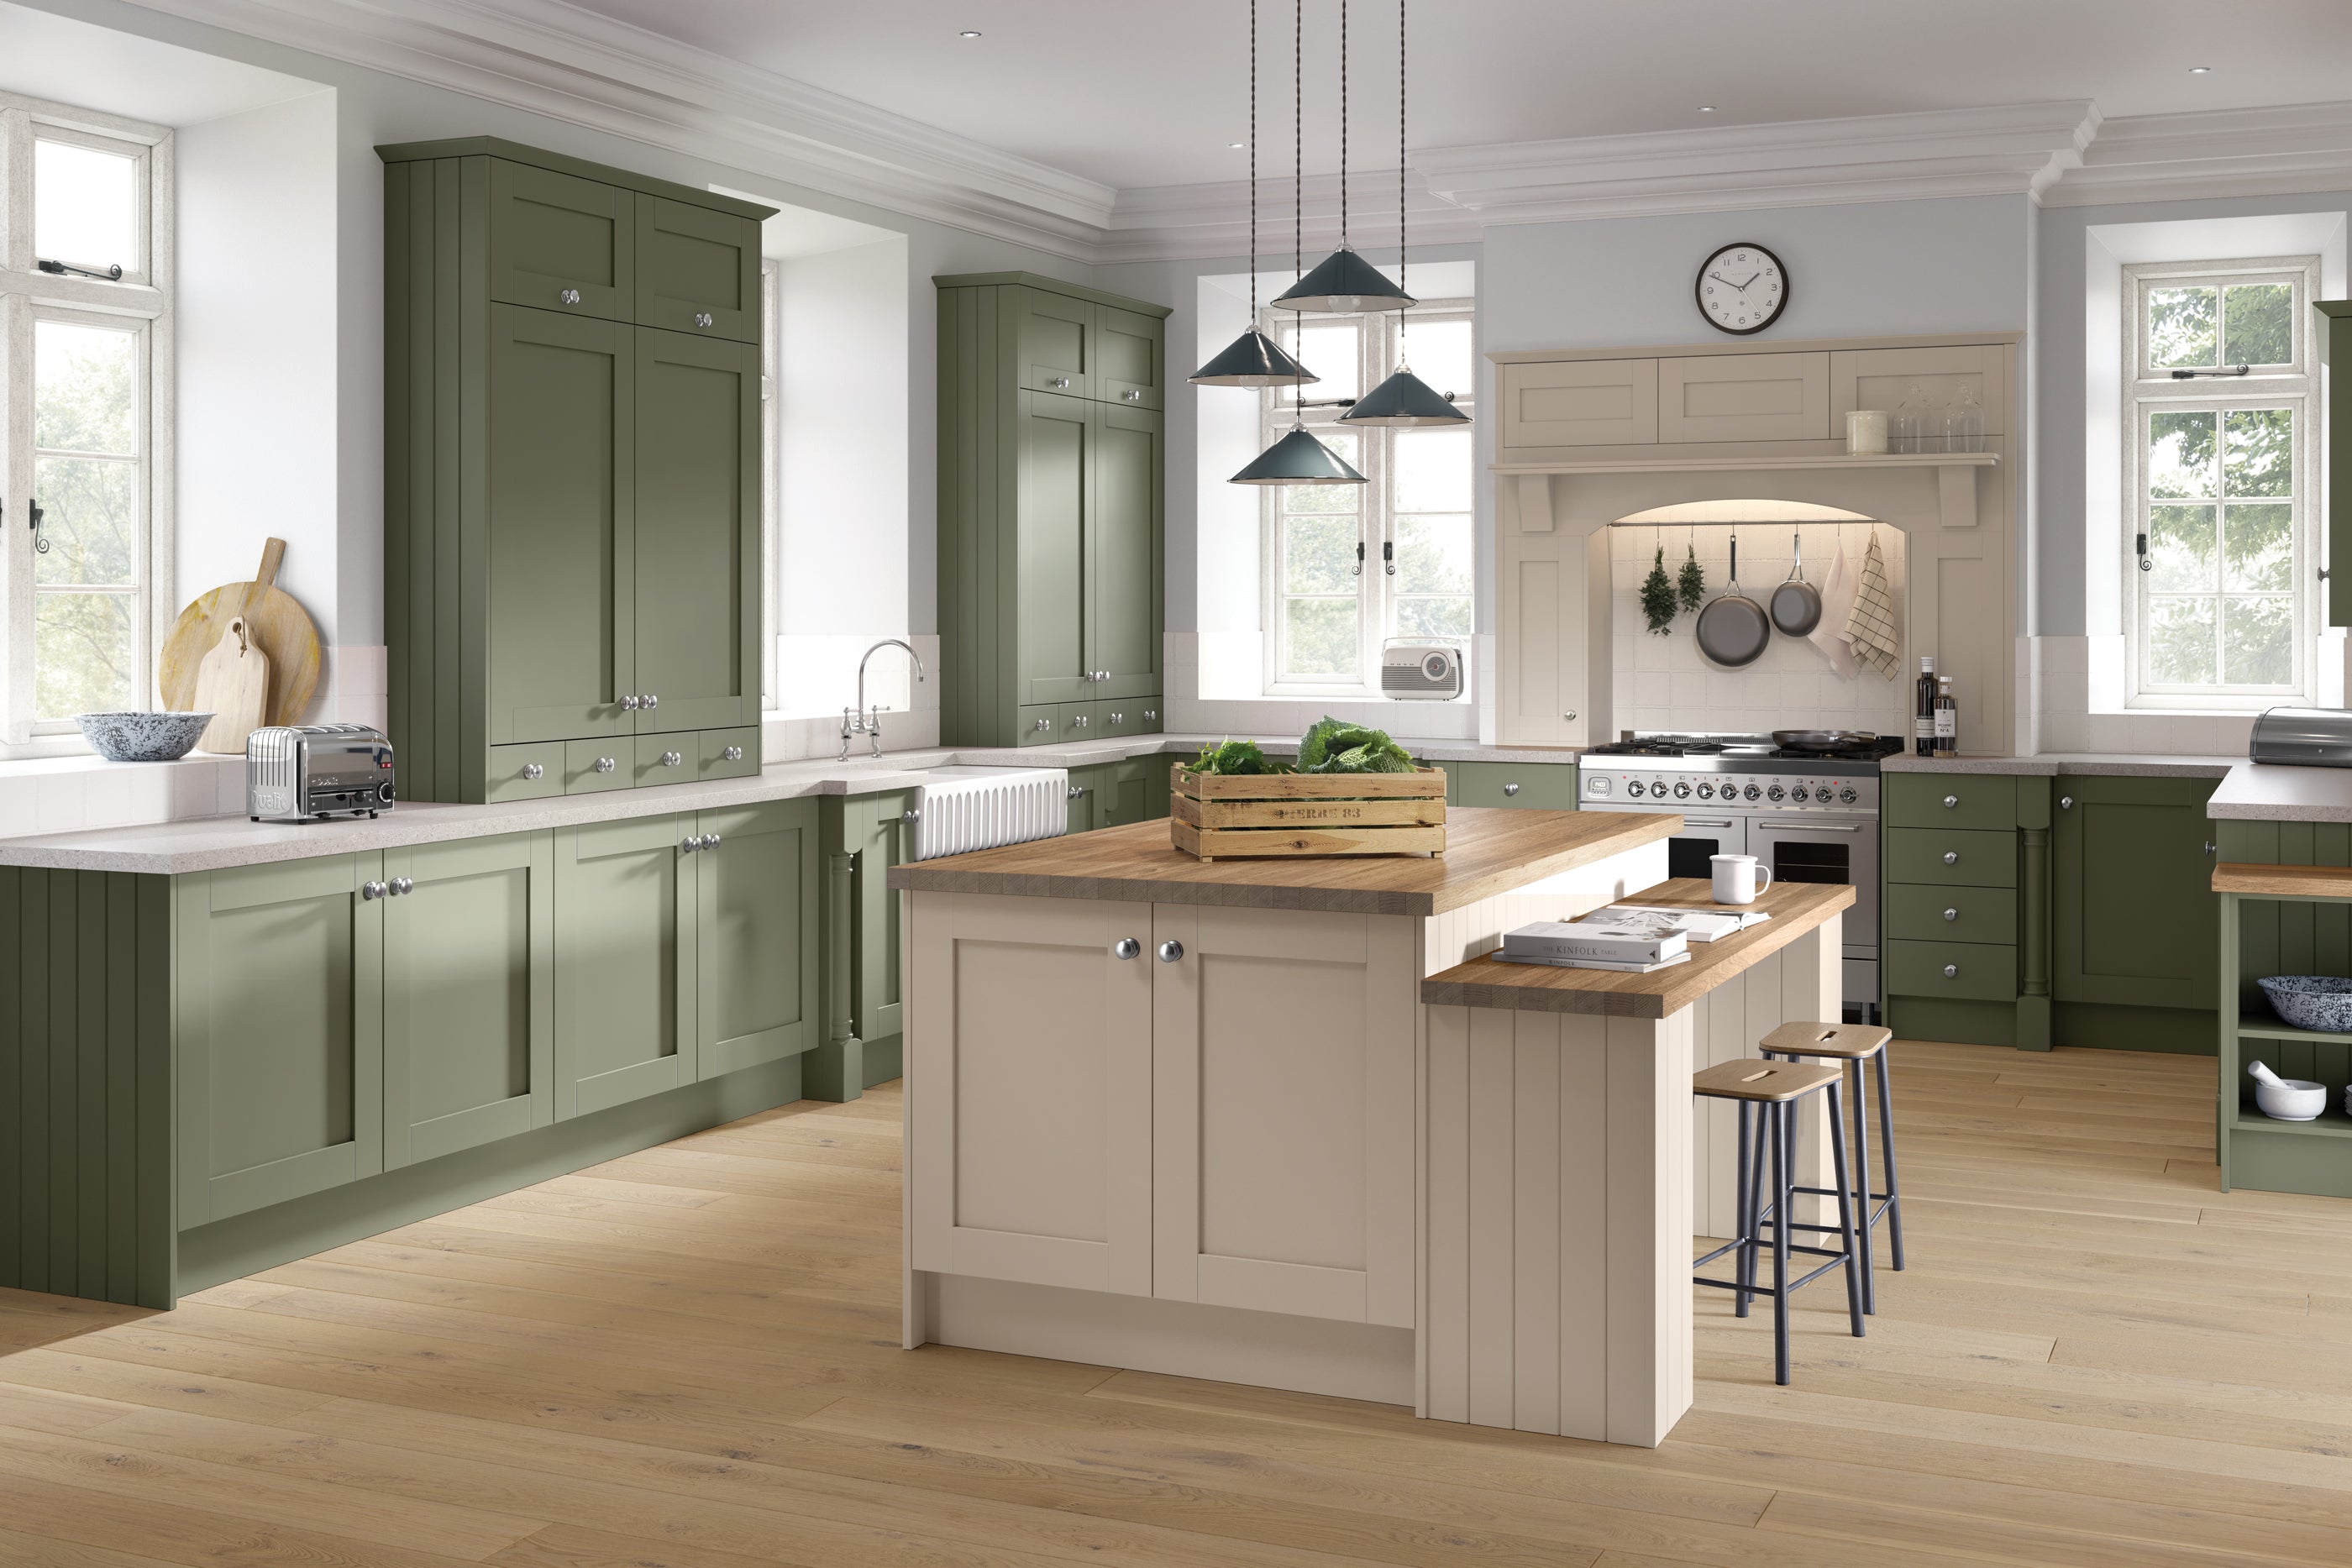 Shaker kitchen ideas – 10 ways to embrace this classic style